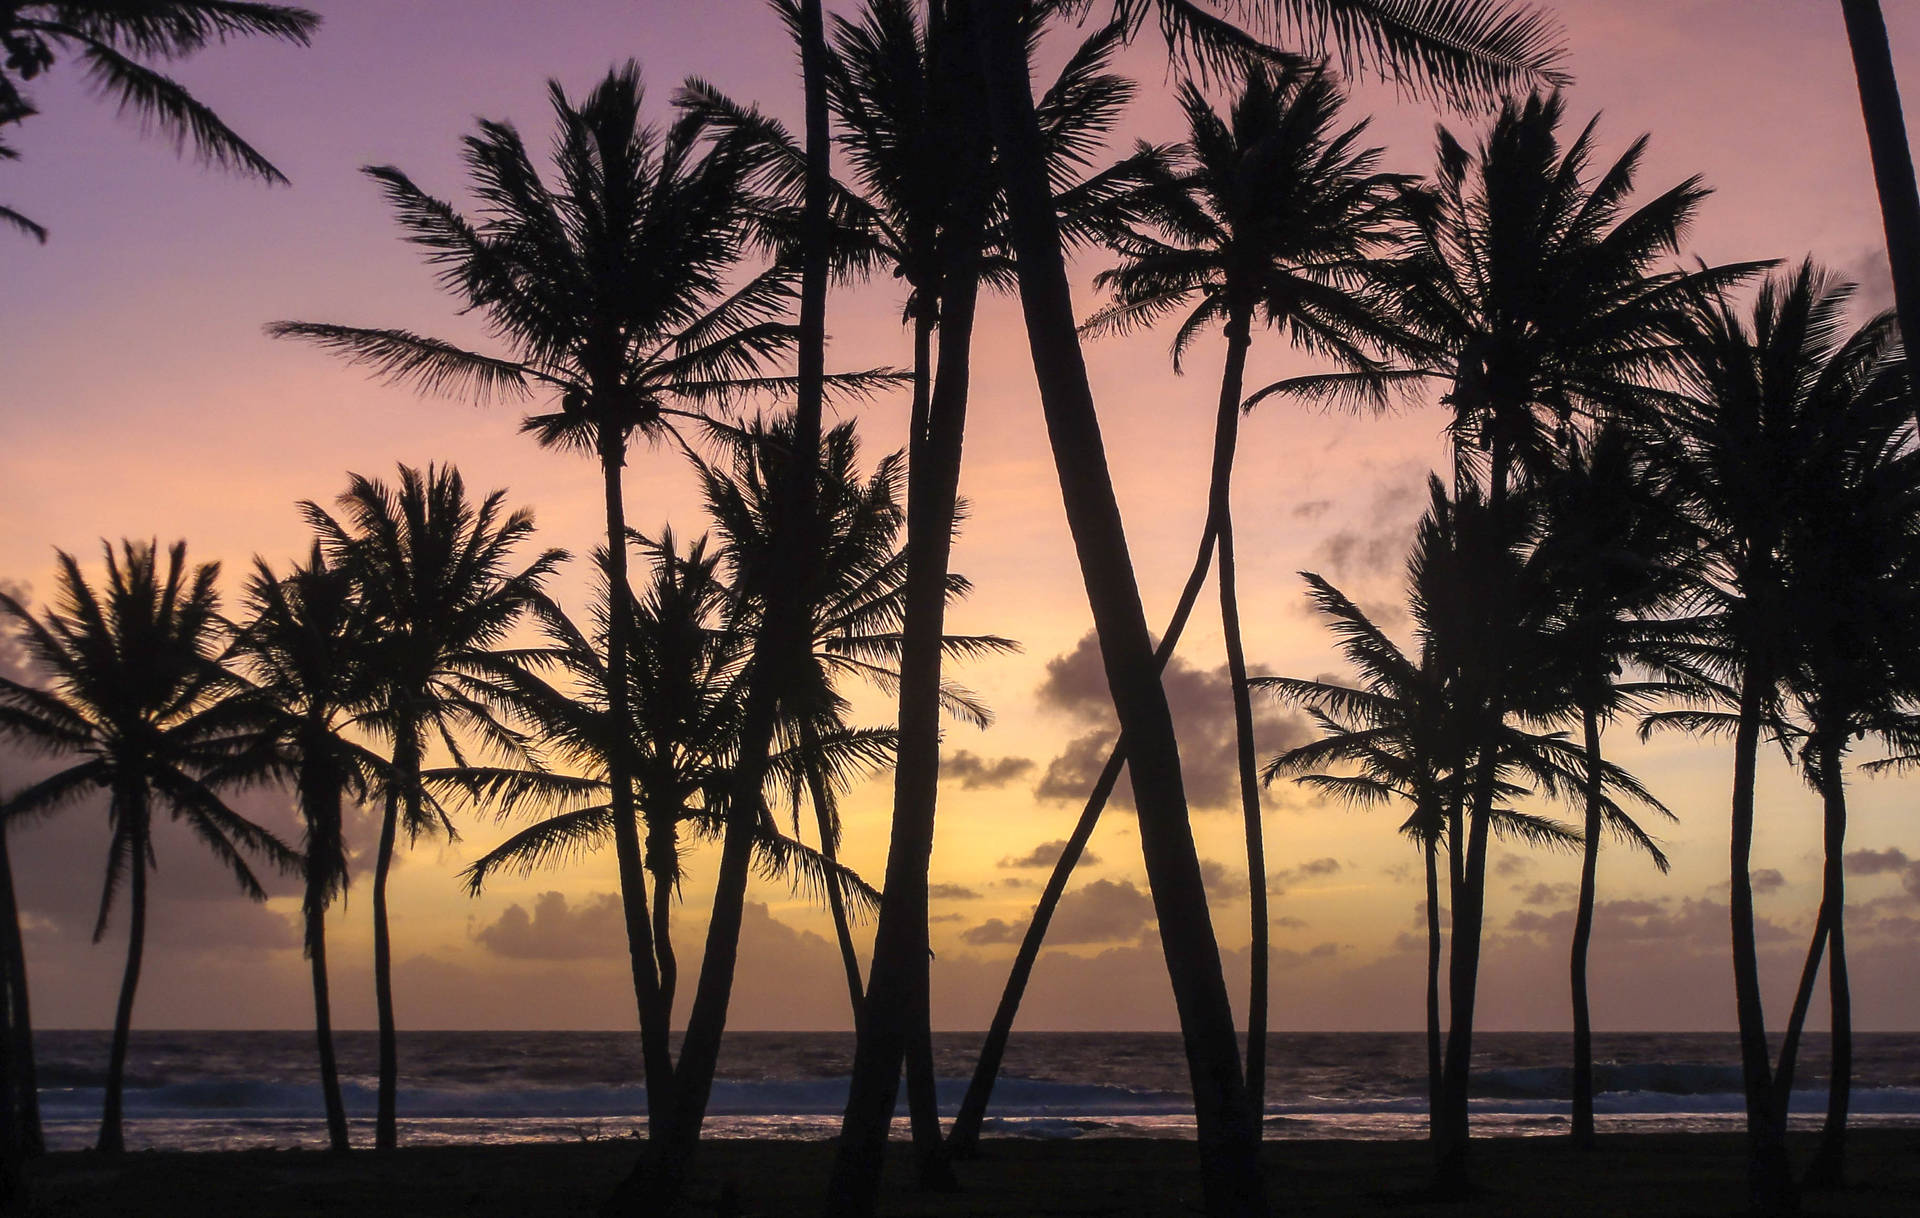 Pine Trees At Sunset In Marshall Islands Wallpaper